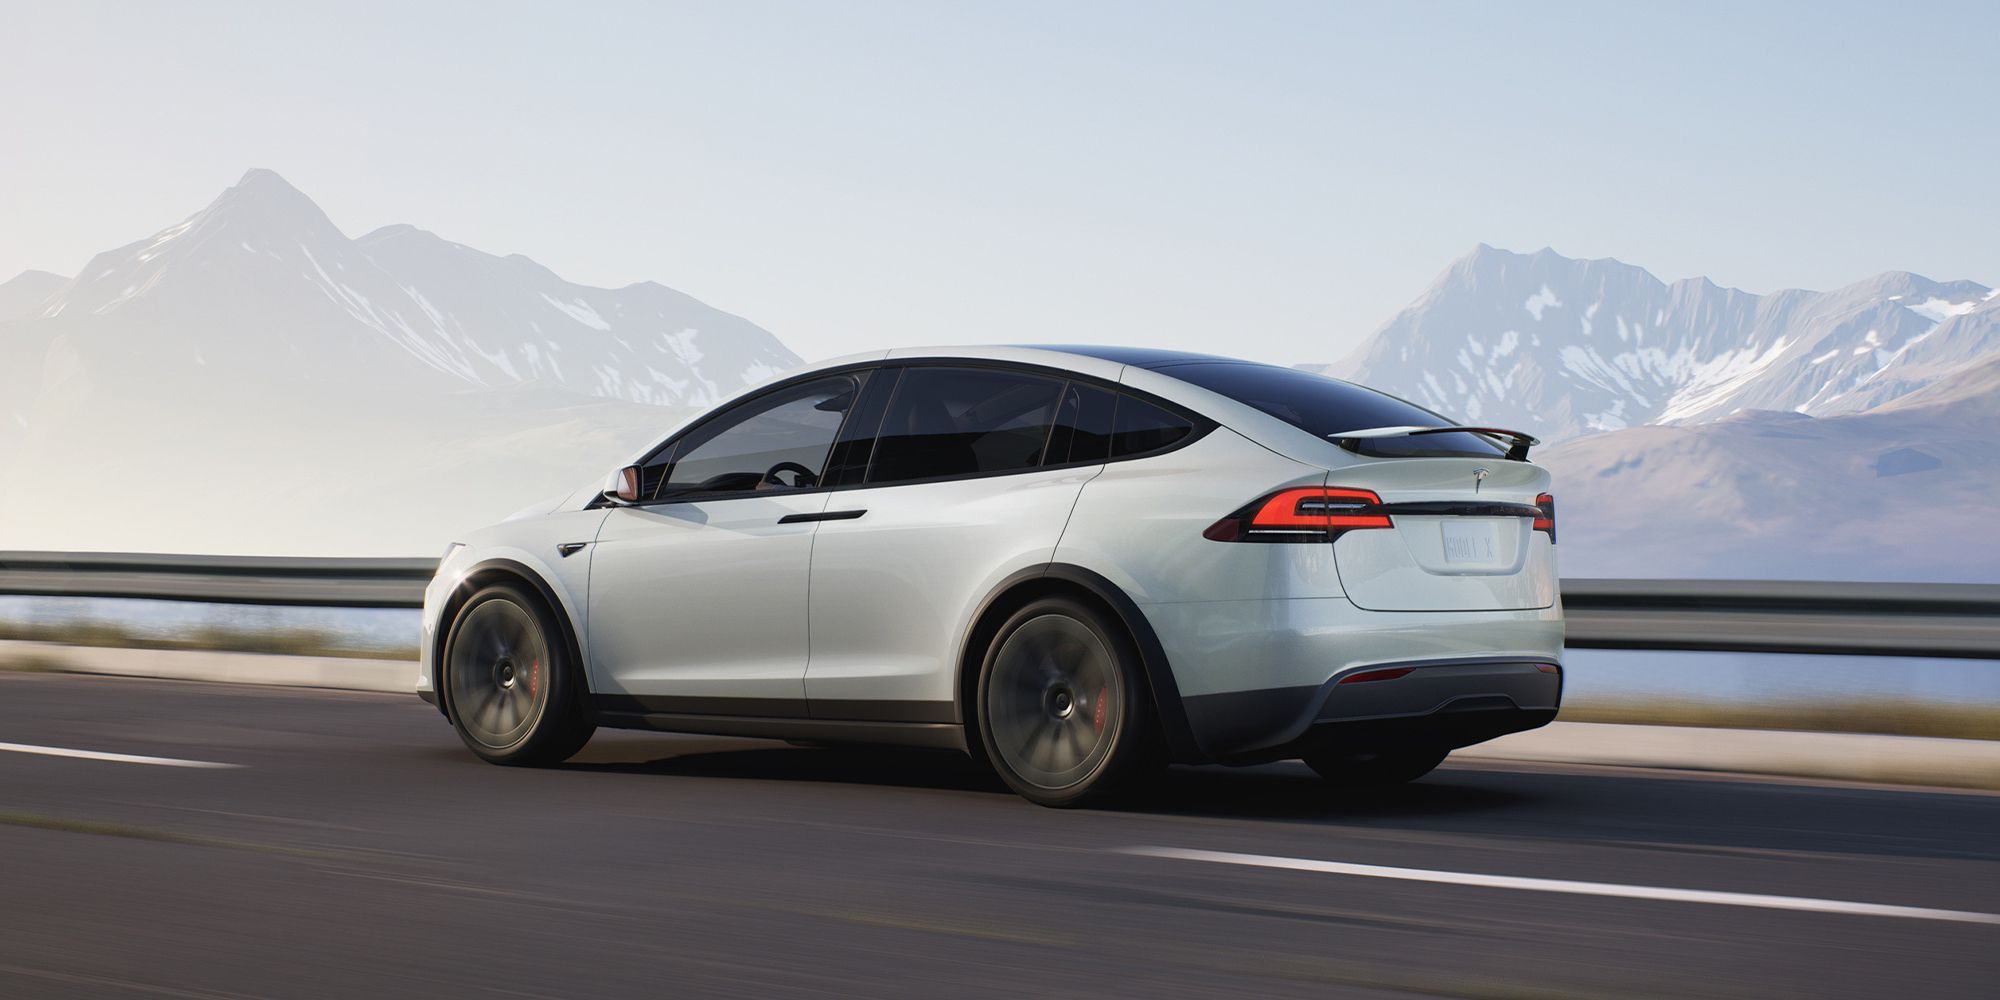 The rear of the facelifted Model X